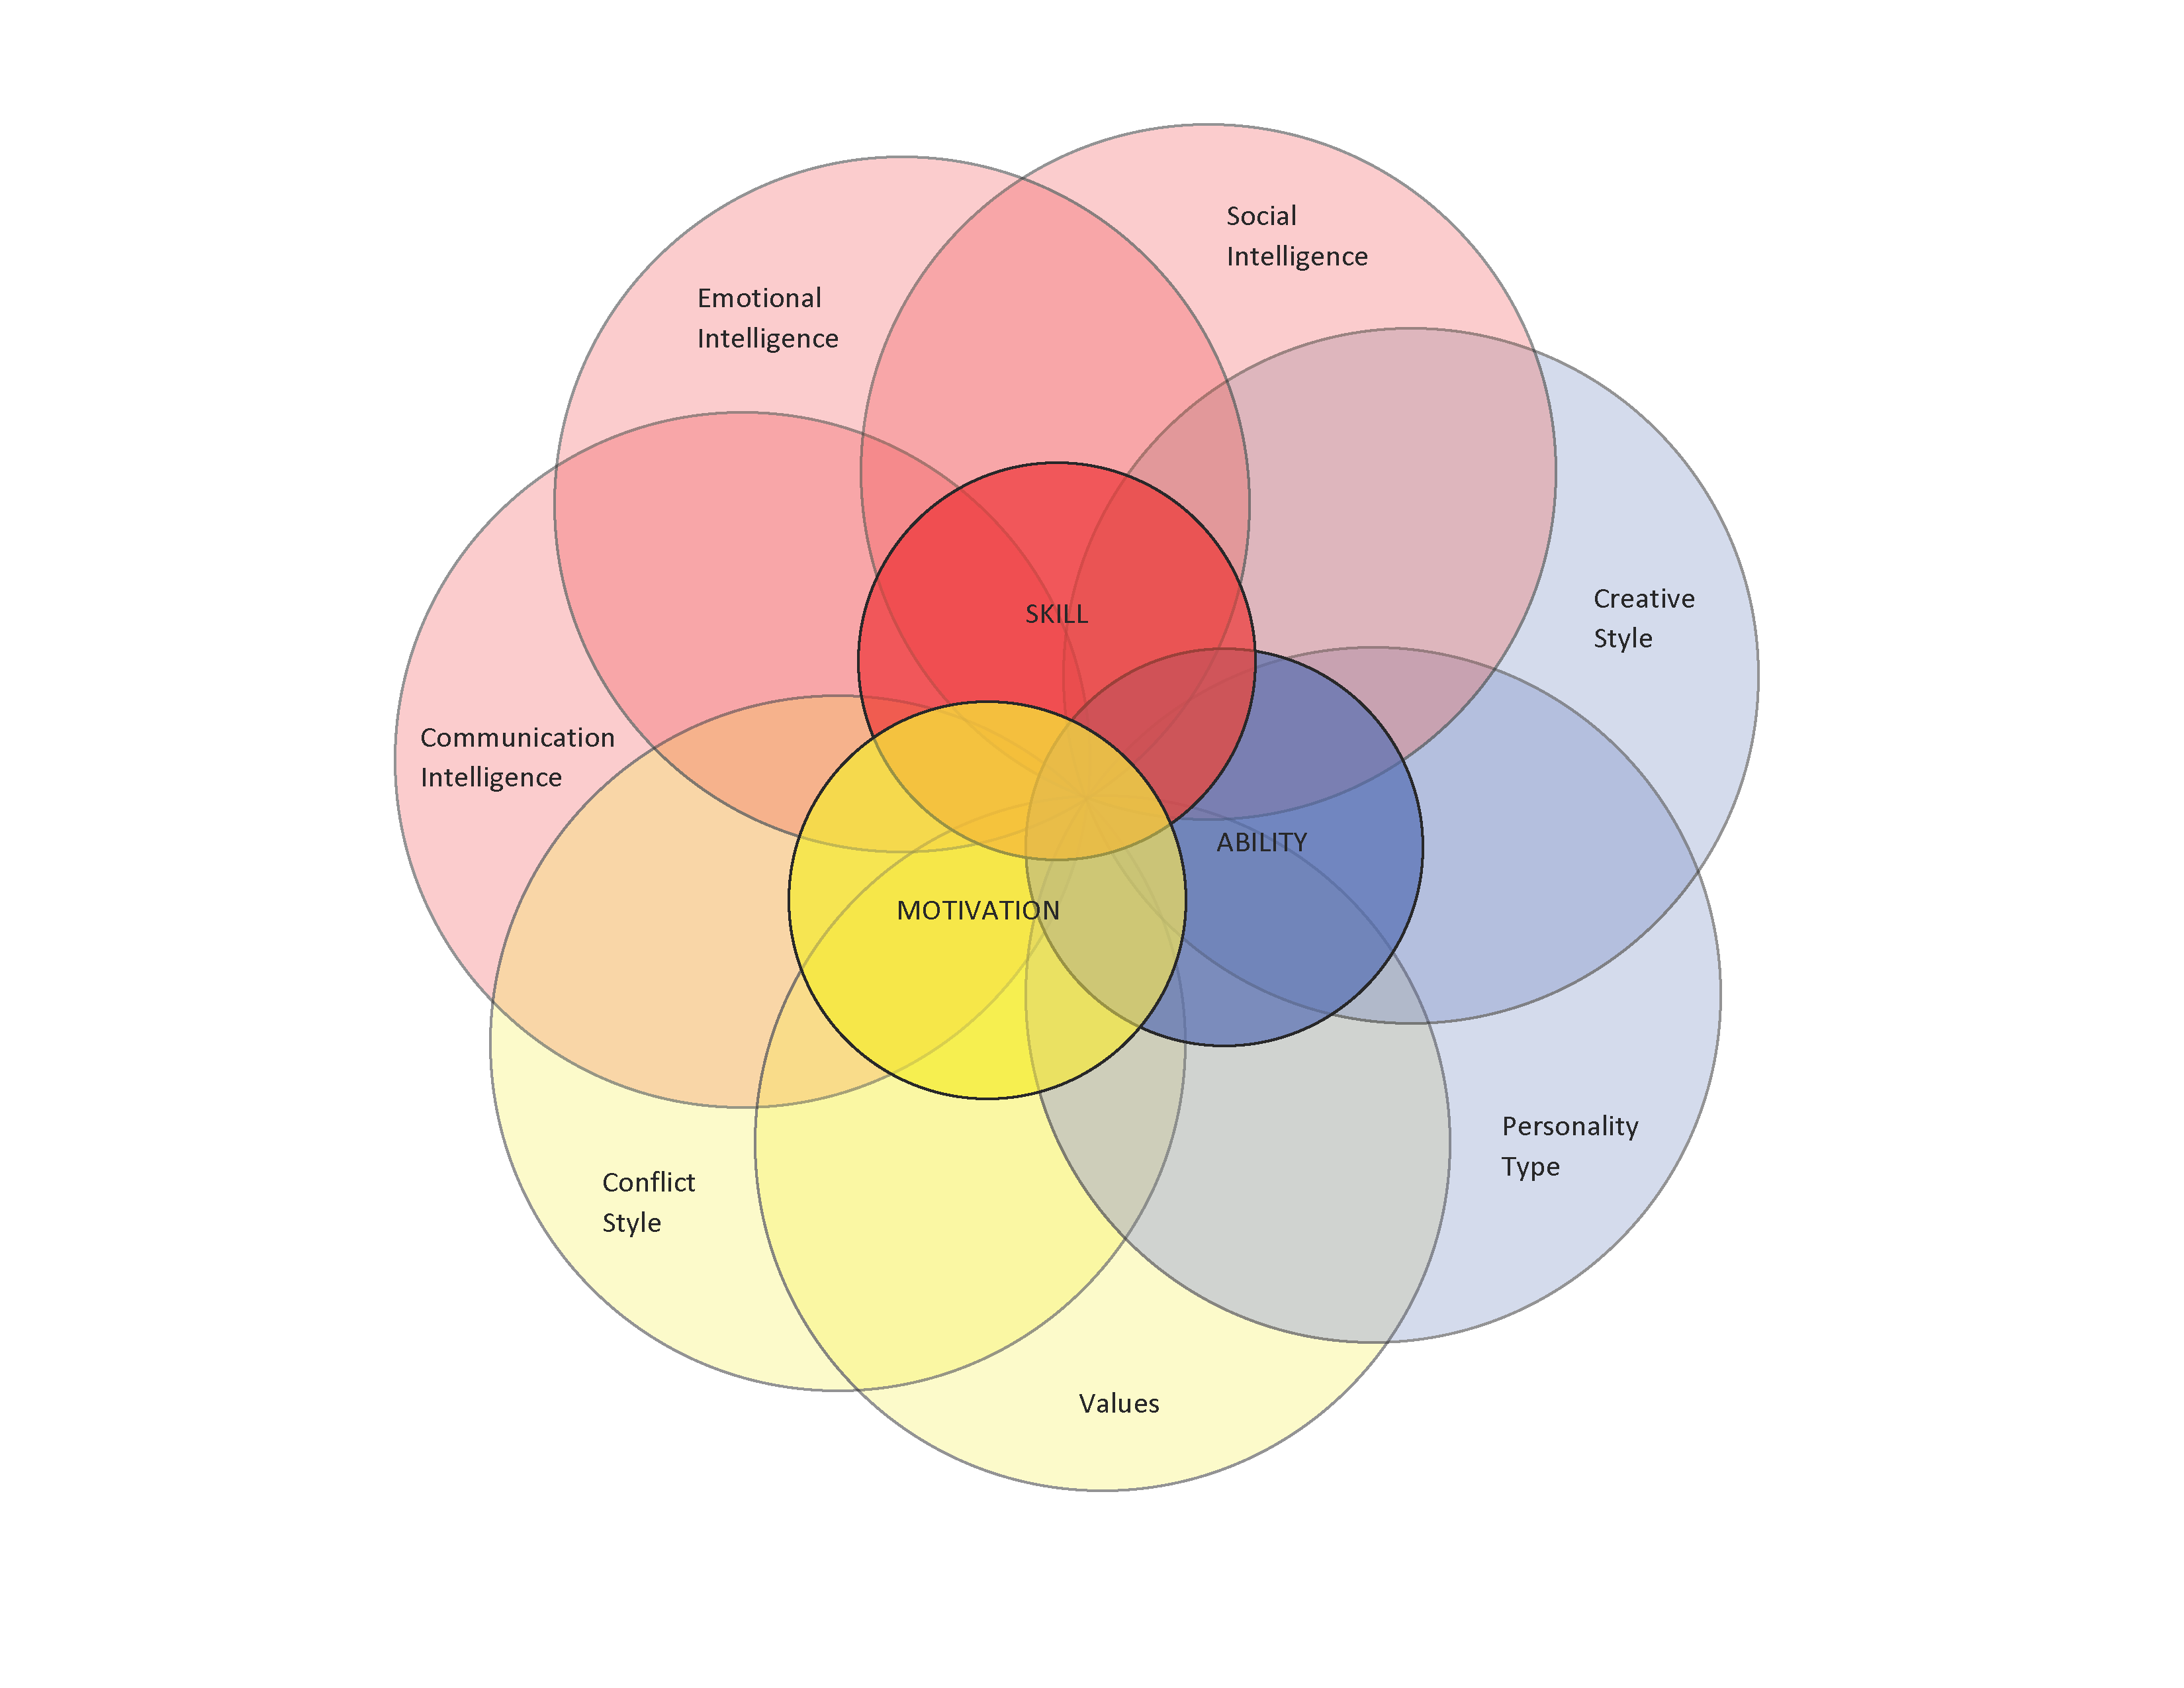 venn diagram of parts of interpersonal creativity. Outer rings include emotional intelligence, social intelligence, communication intelligence, creative style, personality type, values, and conflict style. Inner rings include skill, ability, and motivation.